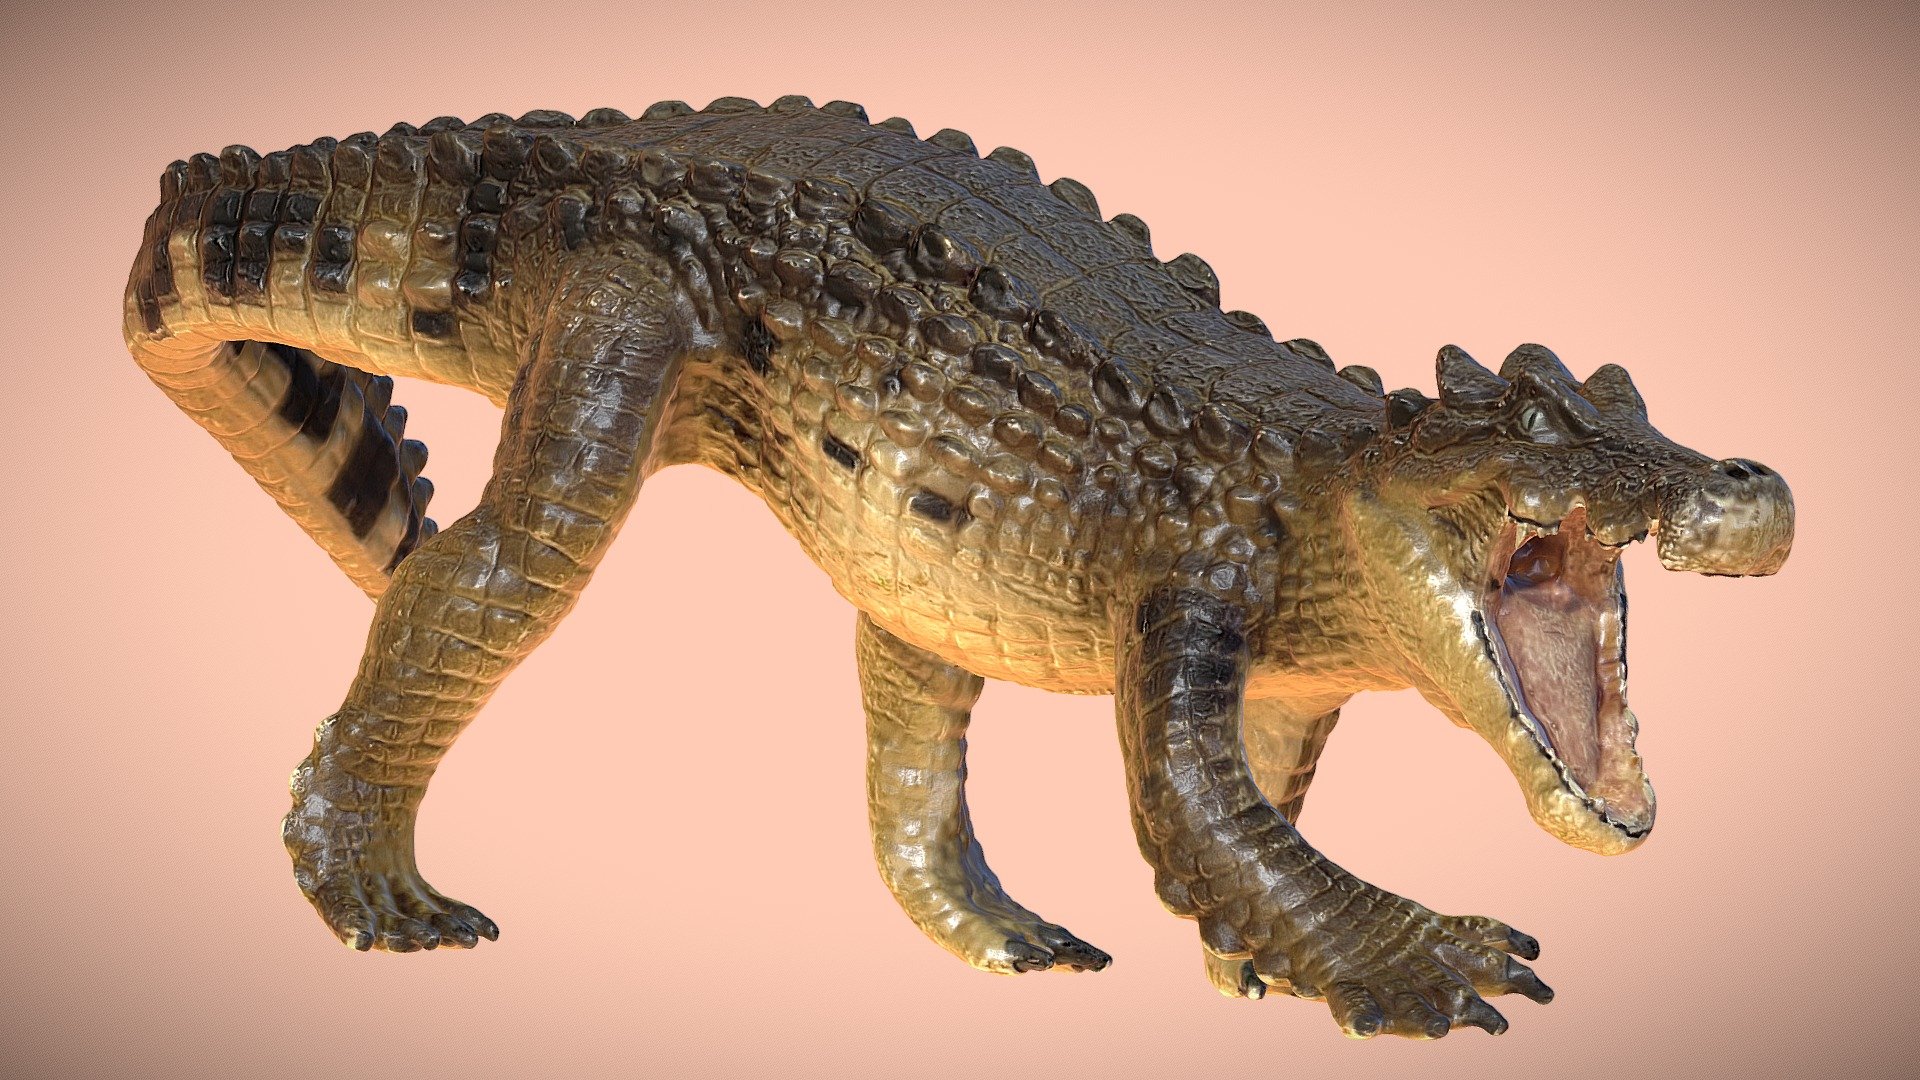 A solid model suitable for 3D printing.

&ldquo;Kaprosuchus is an extinct genus of mahajangasuchid crocodyliform. It is known from a single nearly complete skull collected from the Upper Cretaceous Echkar Formation of Niger. The name means &ldquo;boar crocodile